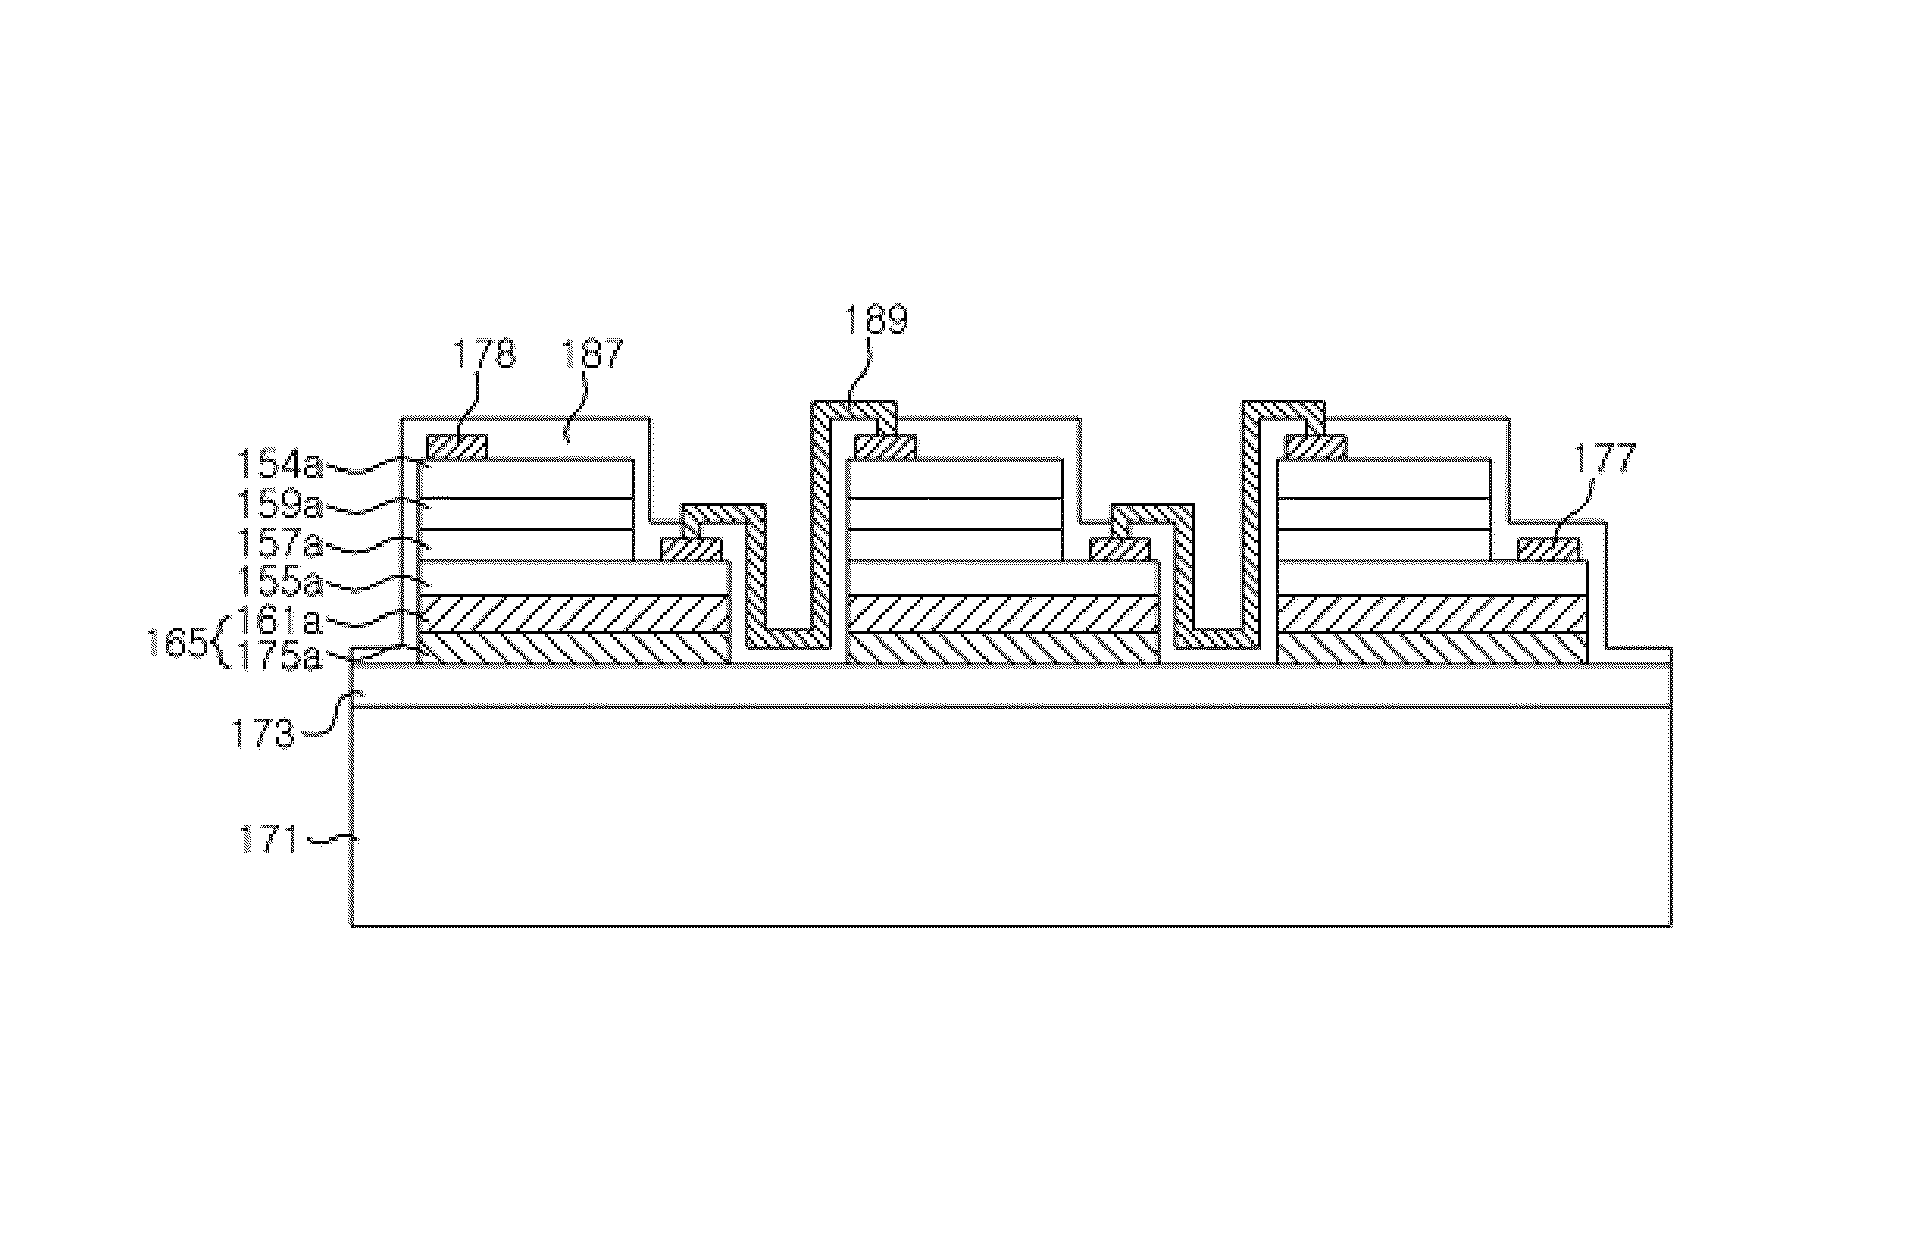 Light emitting diode having AlInGaP active layer and method of fabricating the same